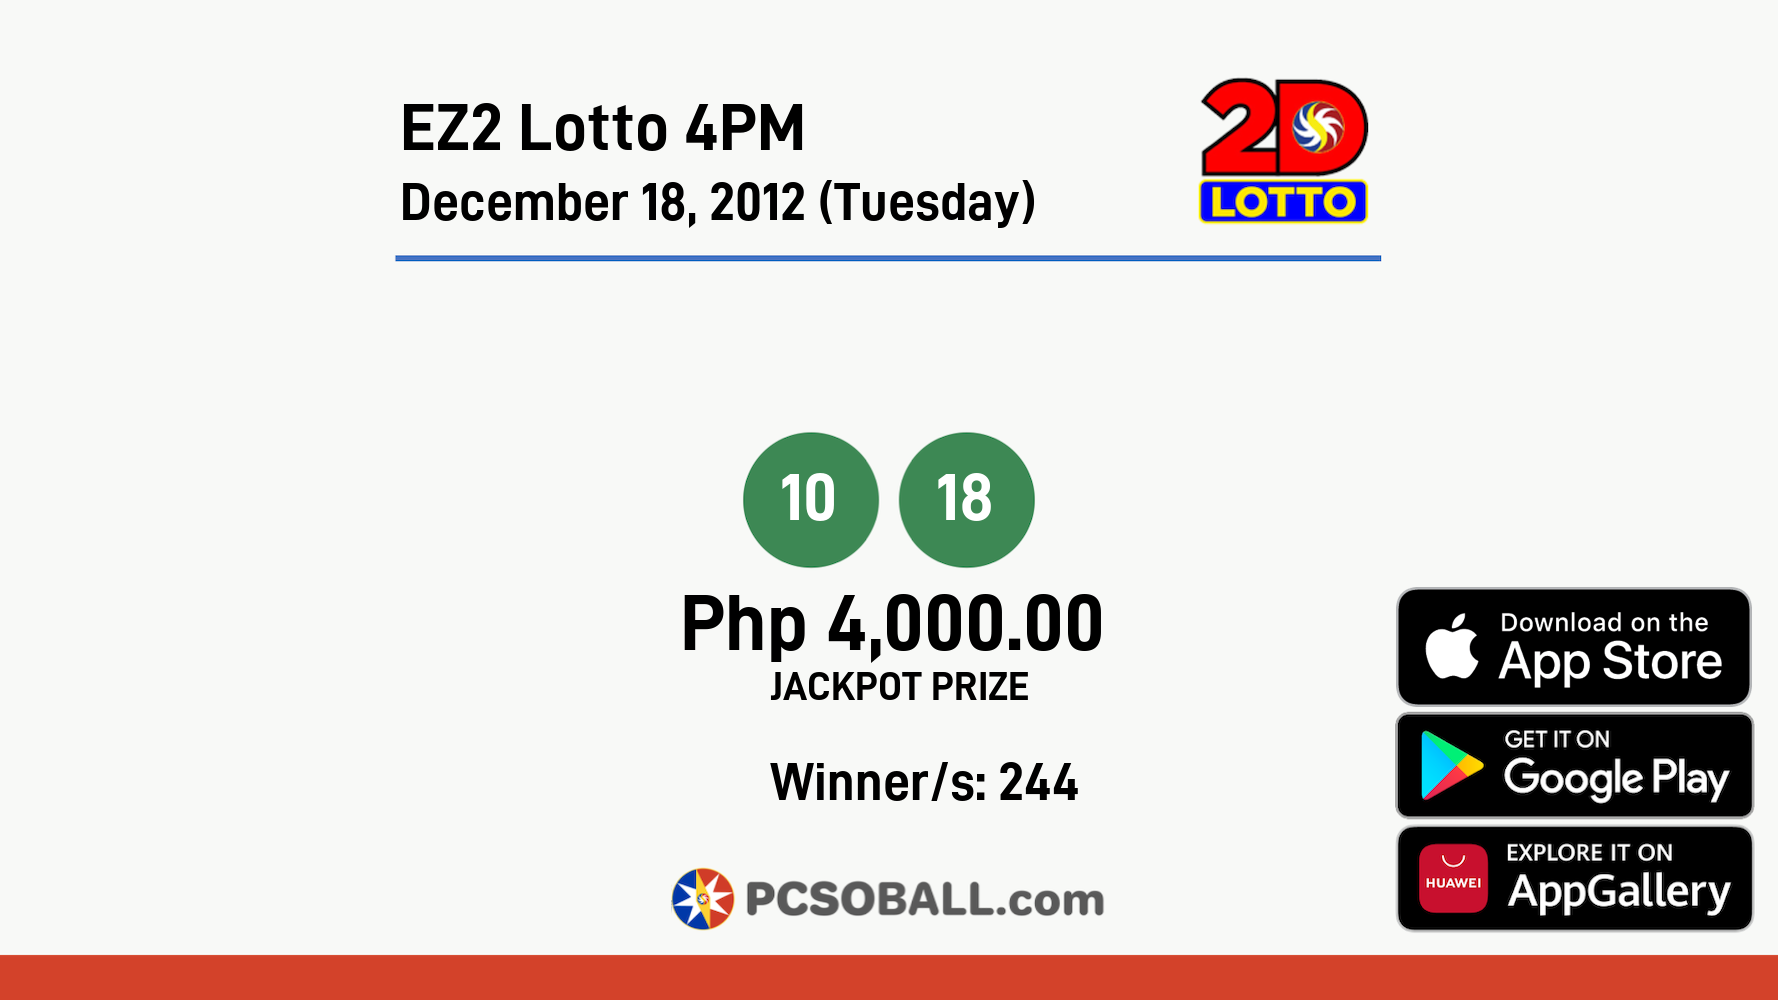 EZ2 Lotto 4PM December 18, 2012 (Tuesday) Result